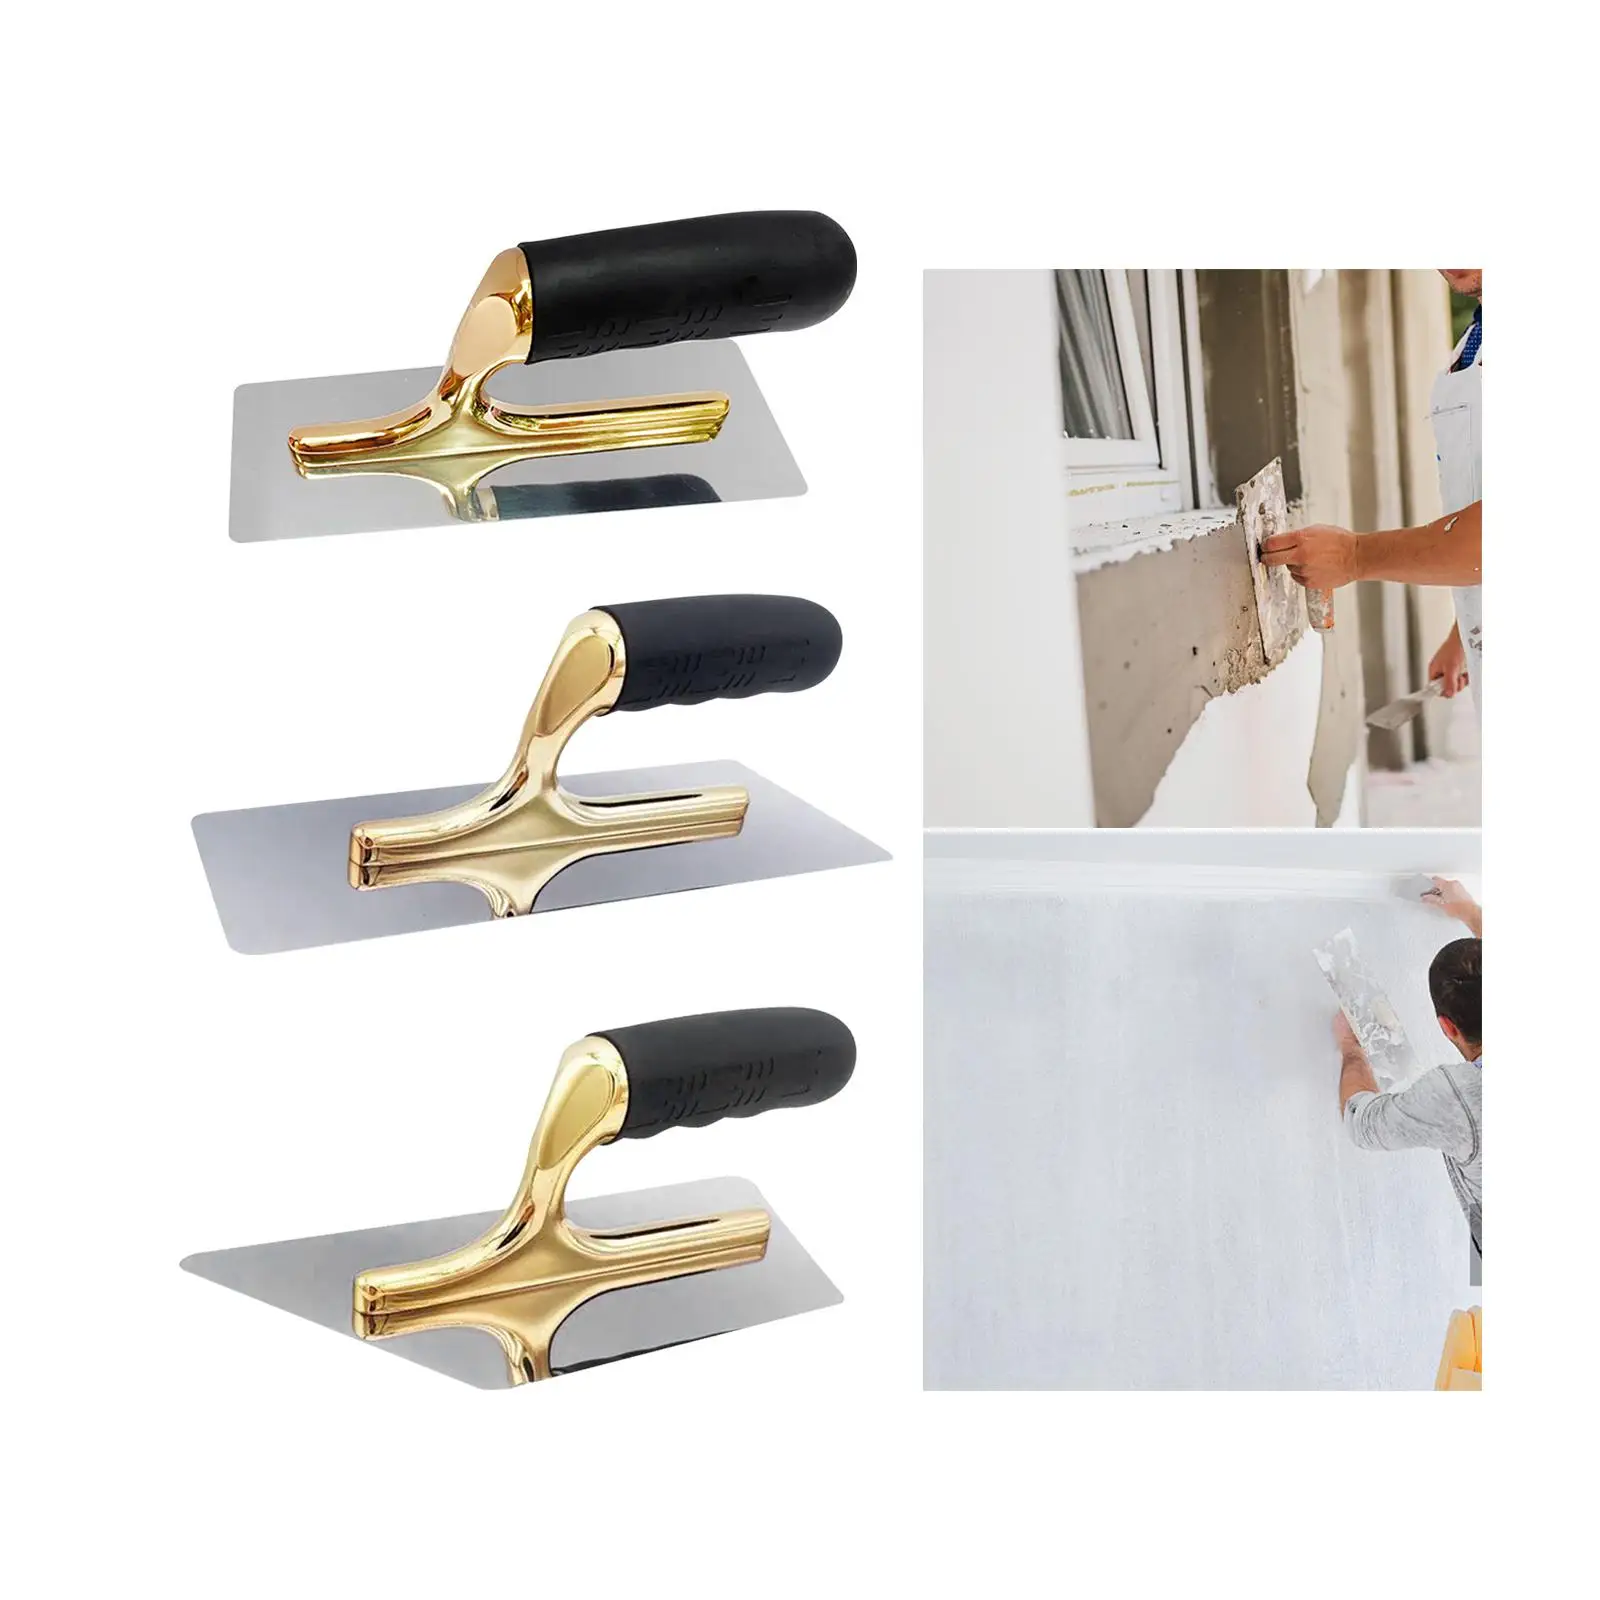 Plastering Trowel Stainless Steel Soft Handle Plaster Cement Putty Scraper Drywall Trowels for Wall Decoration Stucco Cement